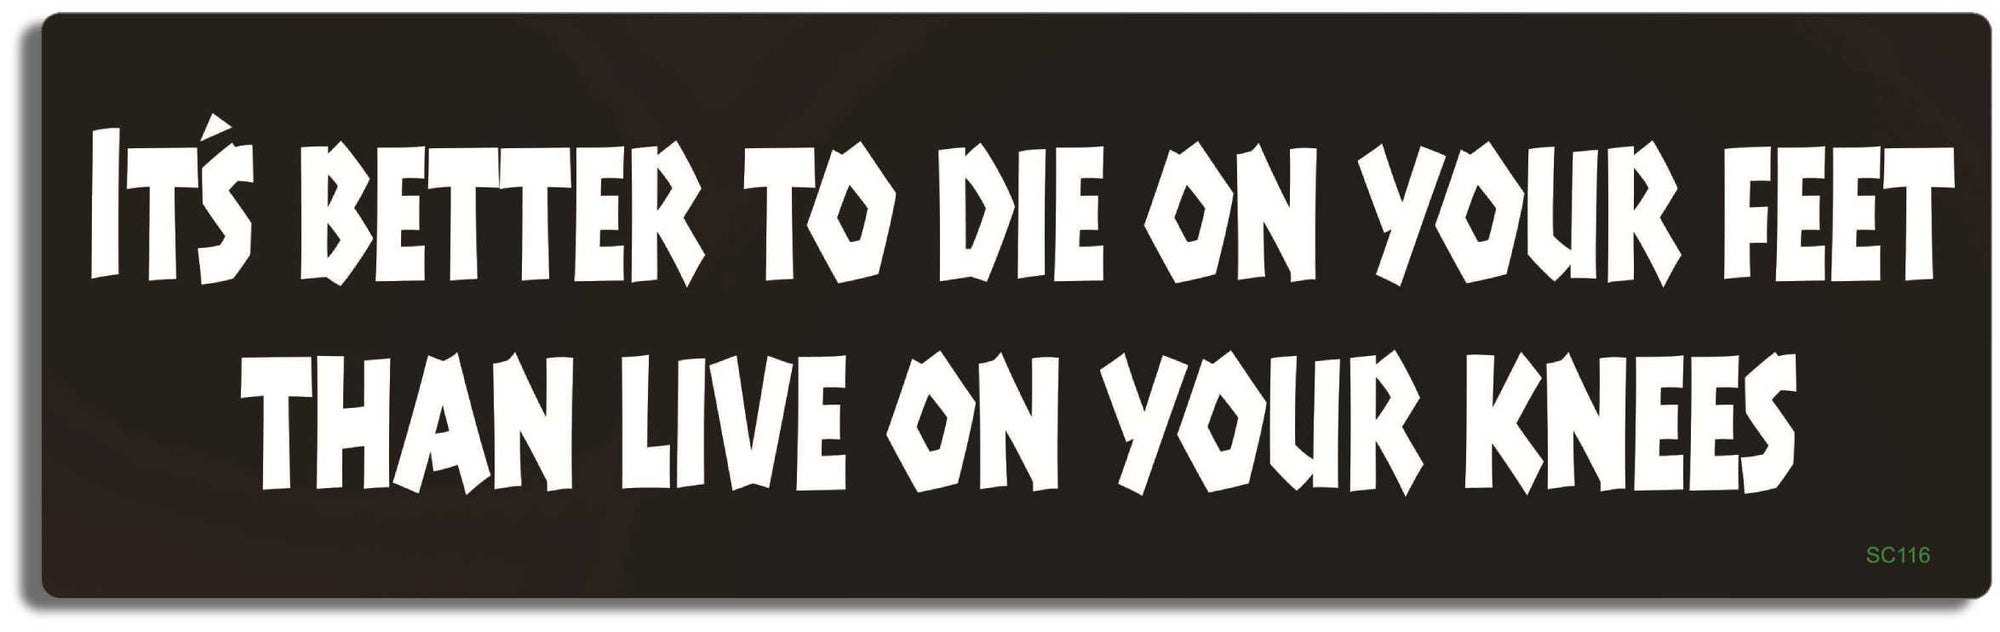 It's better to die on your feet, than live on your knees - 3" x 10" Bumper Sticker--Car Magnet- -  Decal Bumper Sticker-political Bumper Sticker Car Magnet It's better to die on your feet,-  Decal for carsAnti Government, Dissension